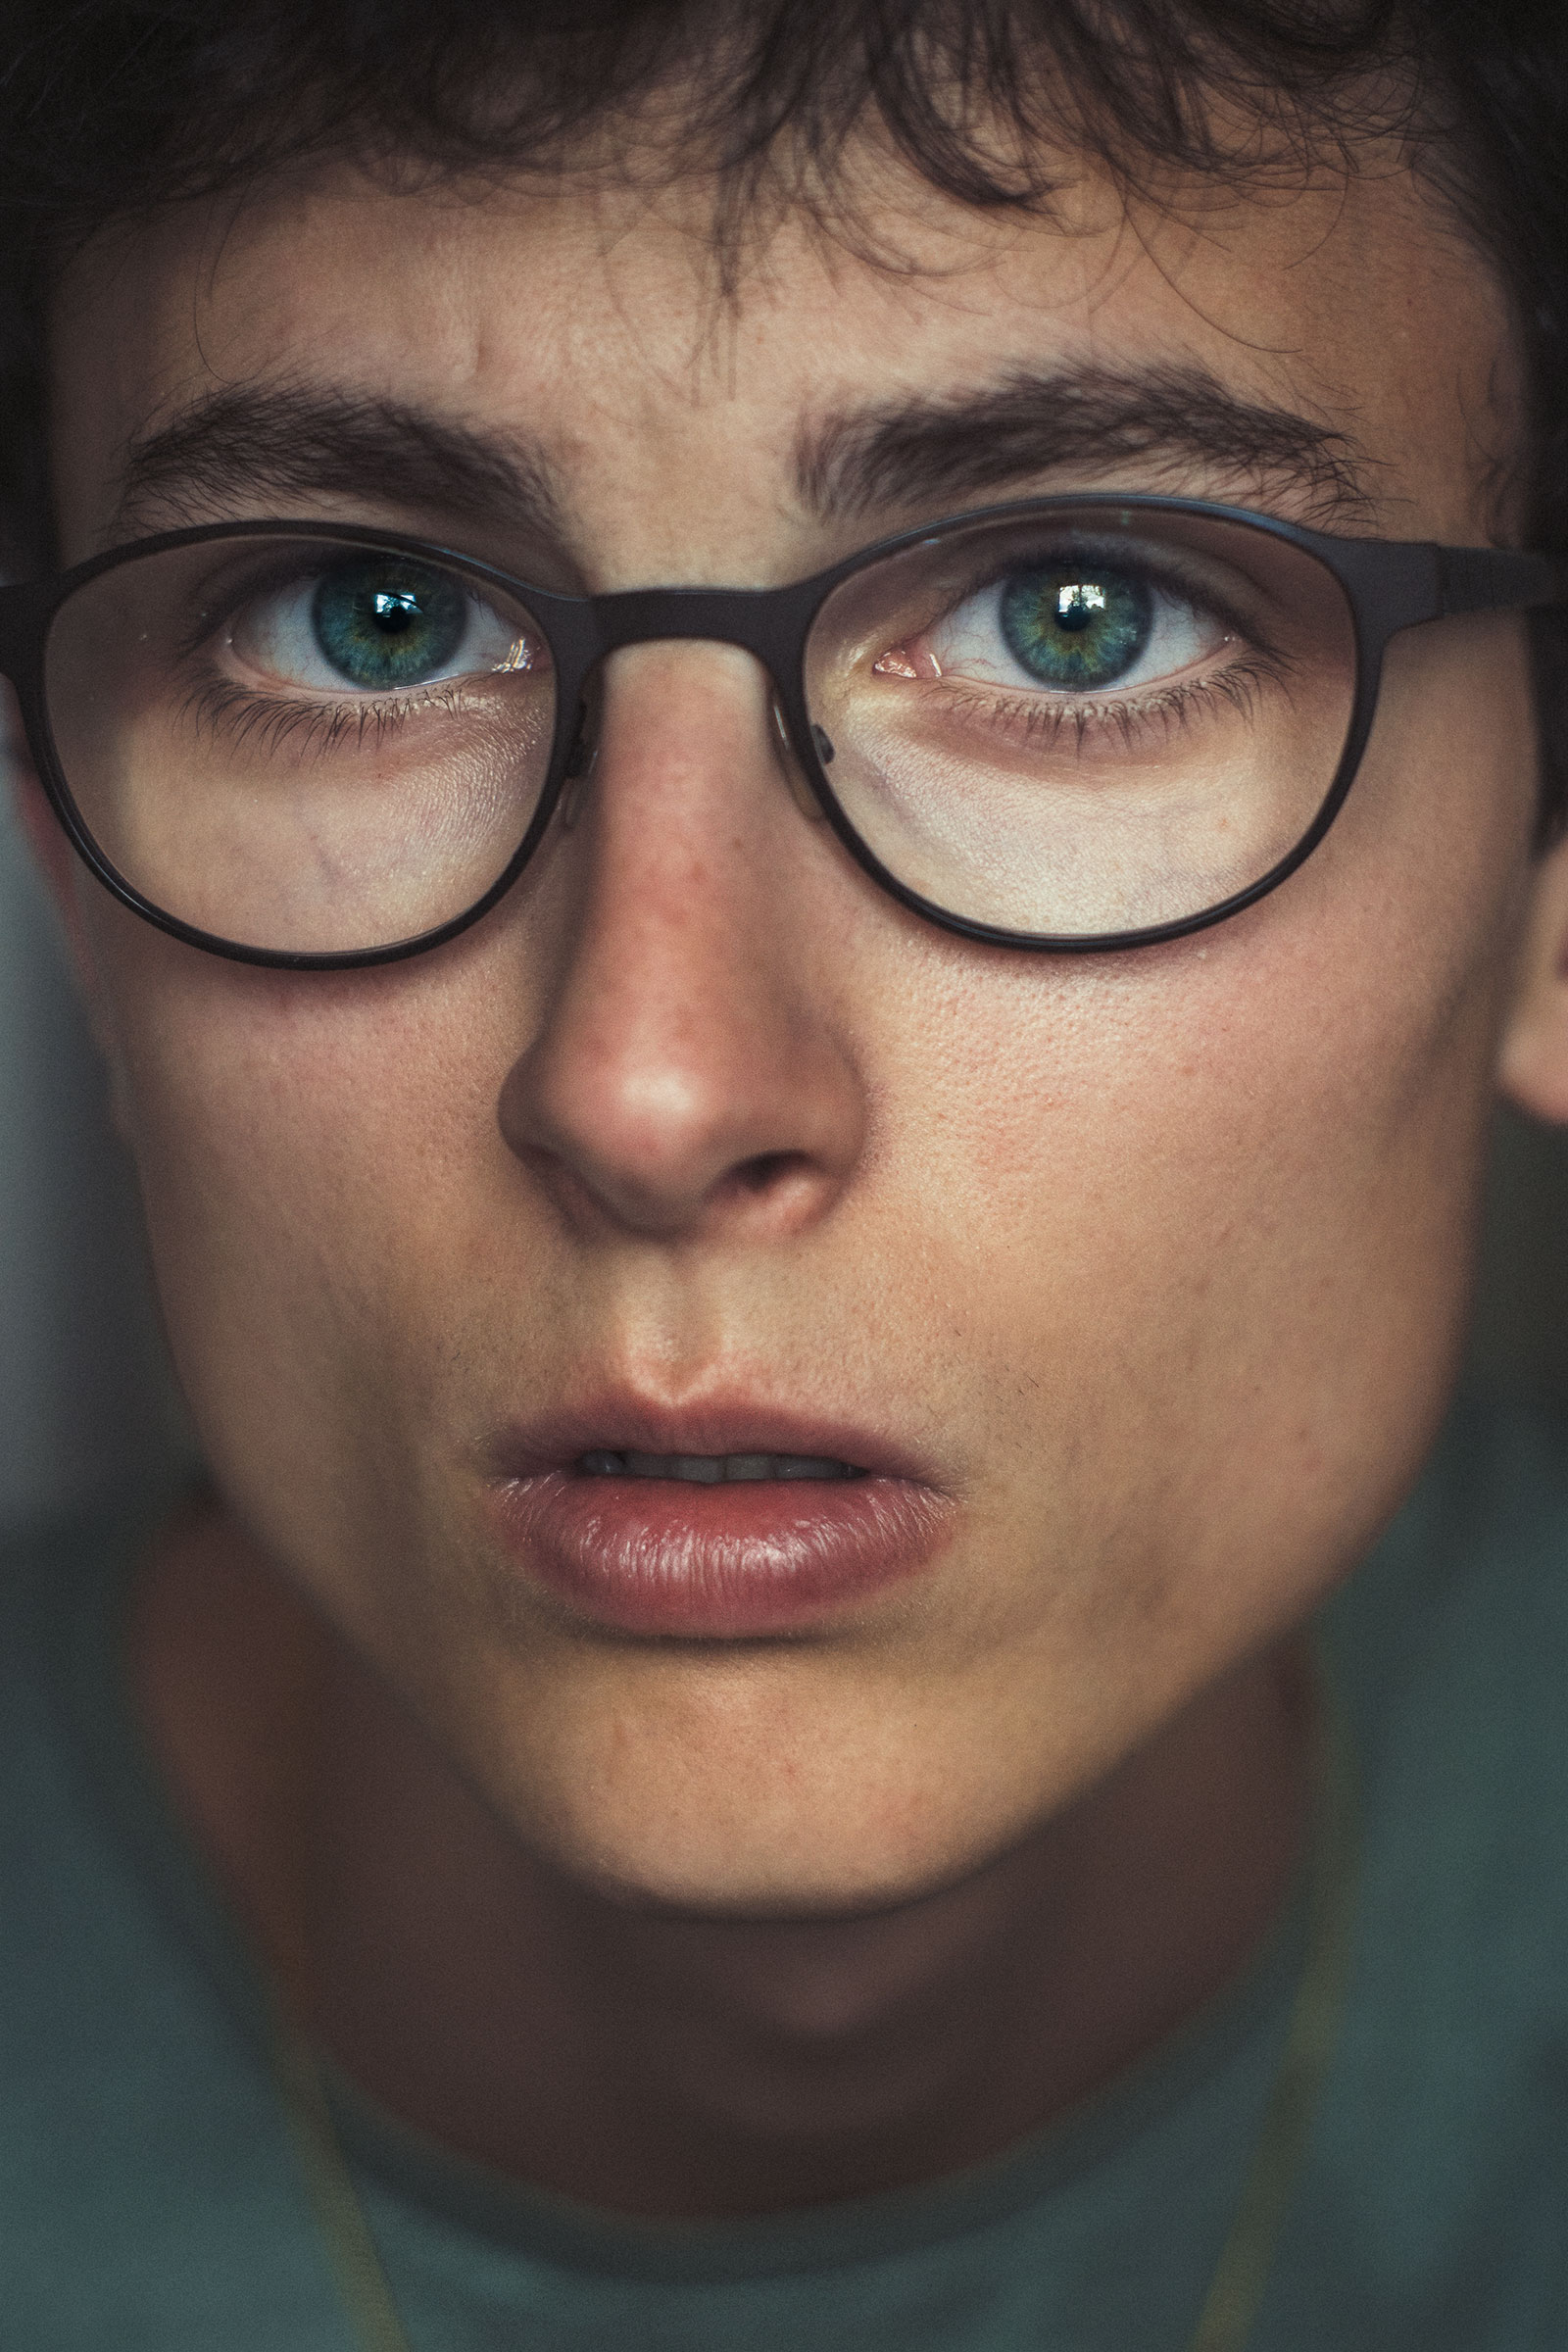 Androgynous person wearing reading glasses has healthy limbal rings of the eyes